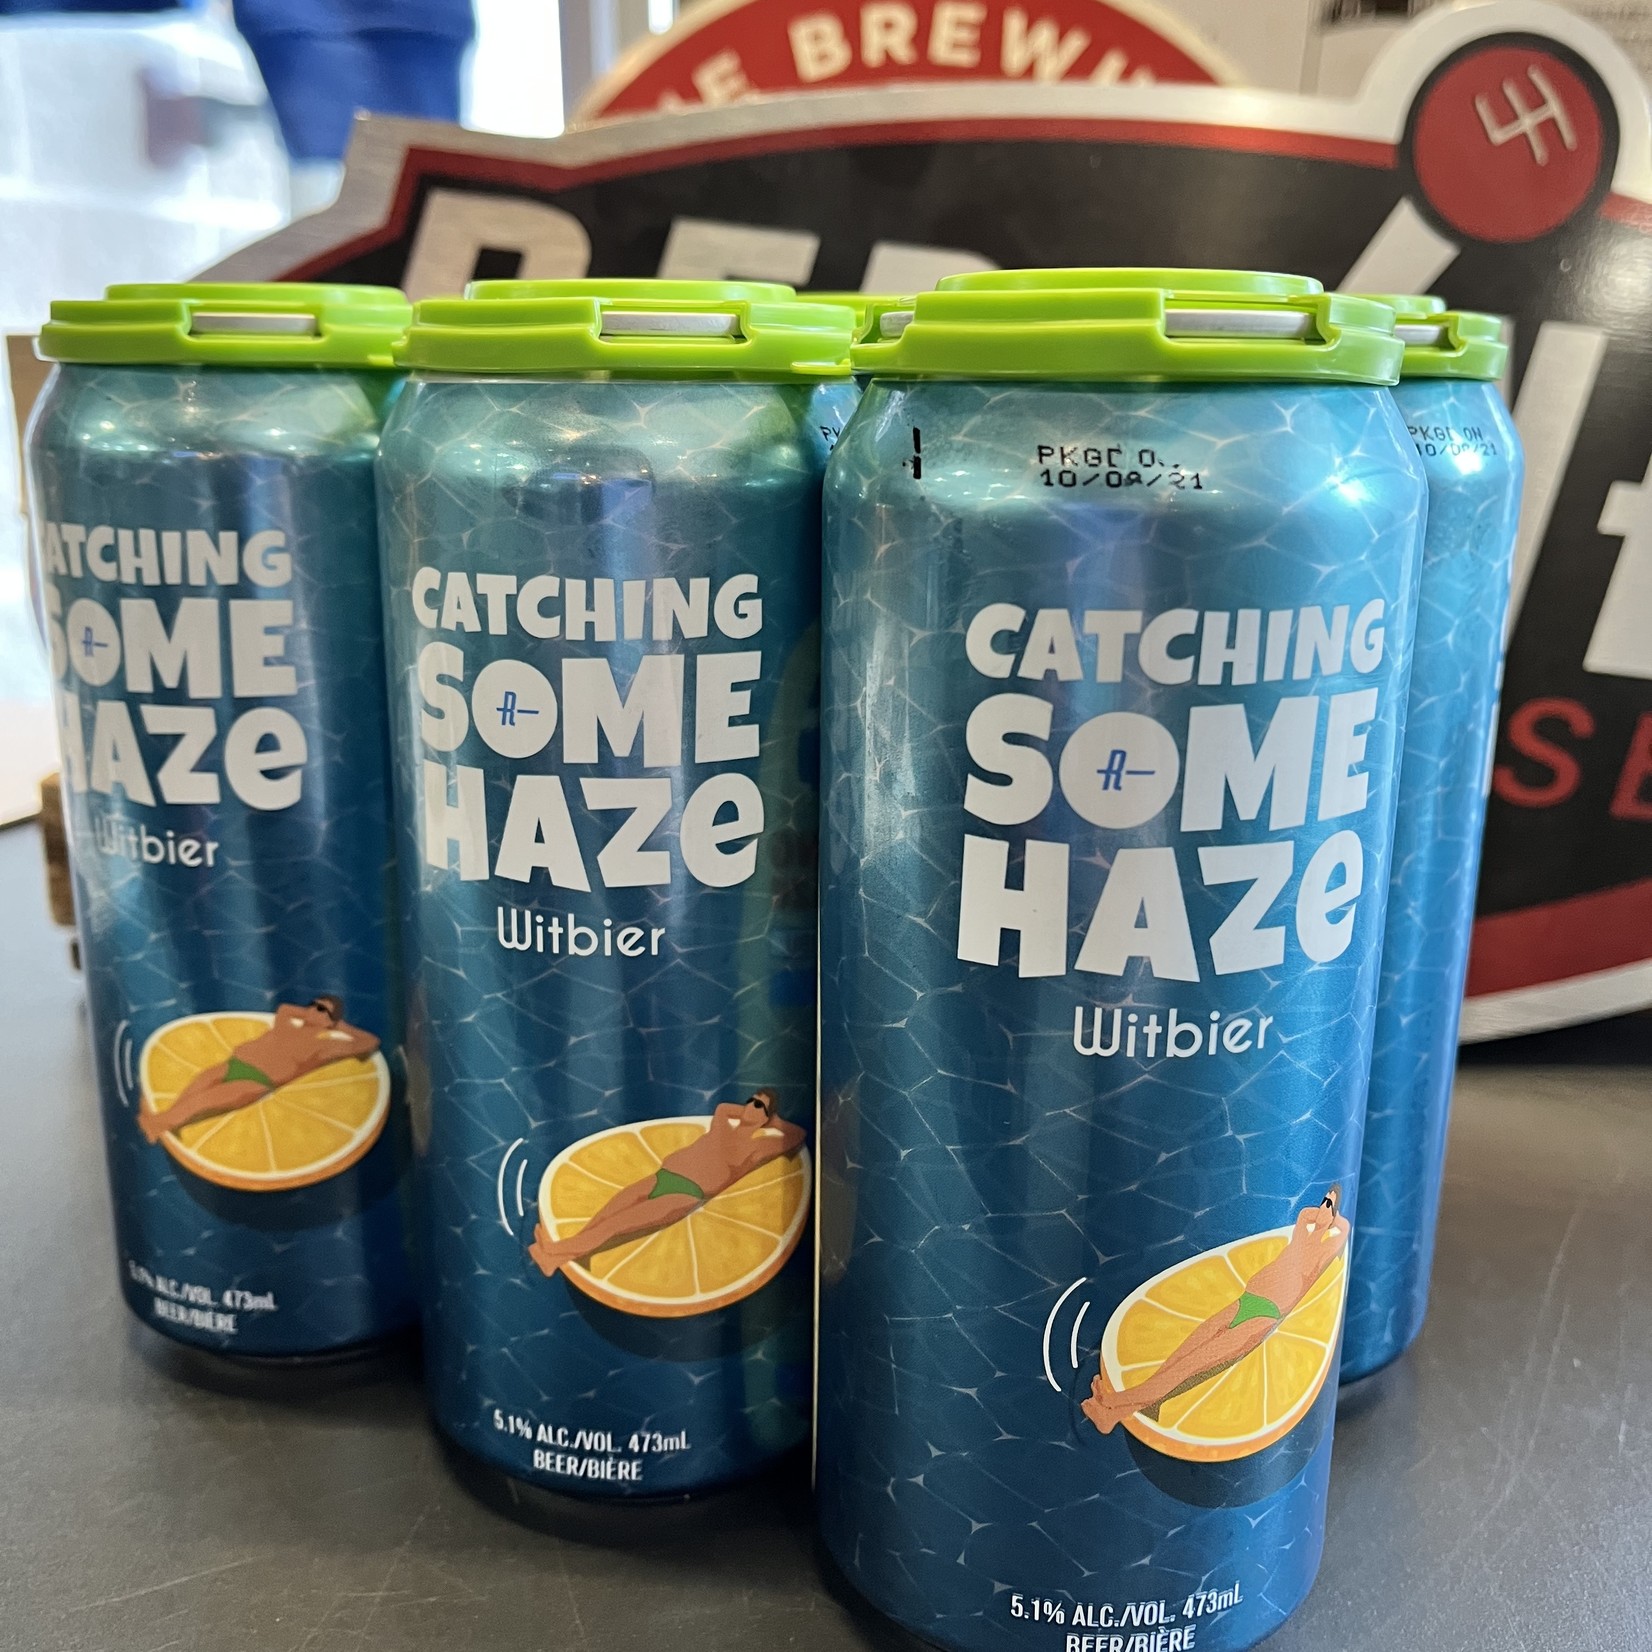 Specialty 6 Pack: Catching Some Haze